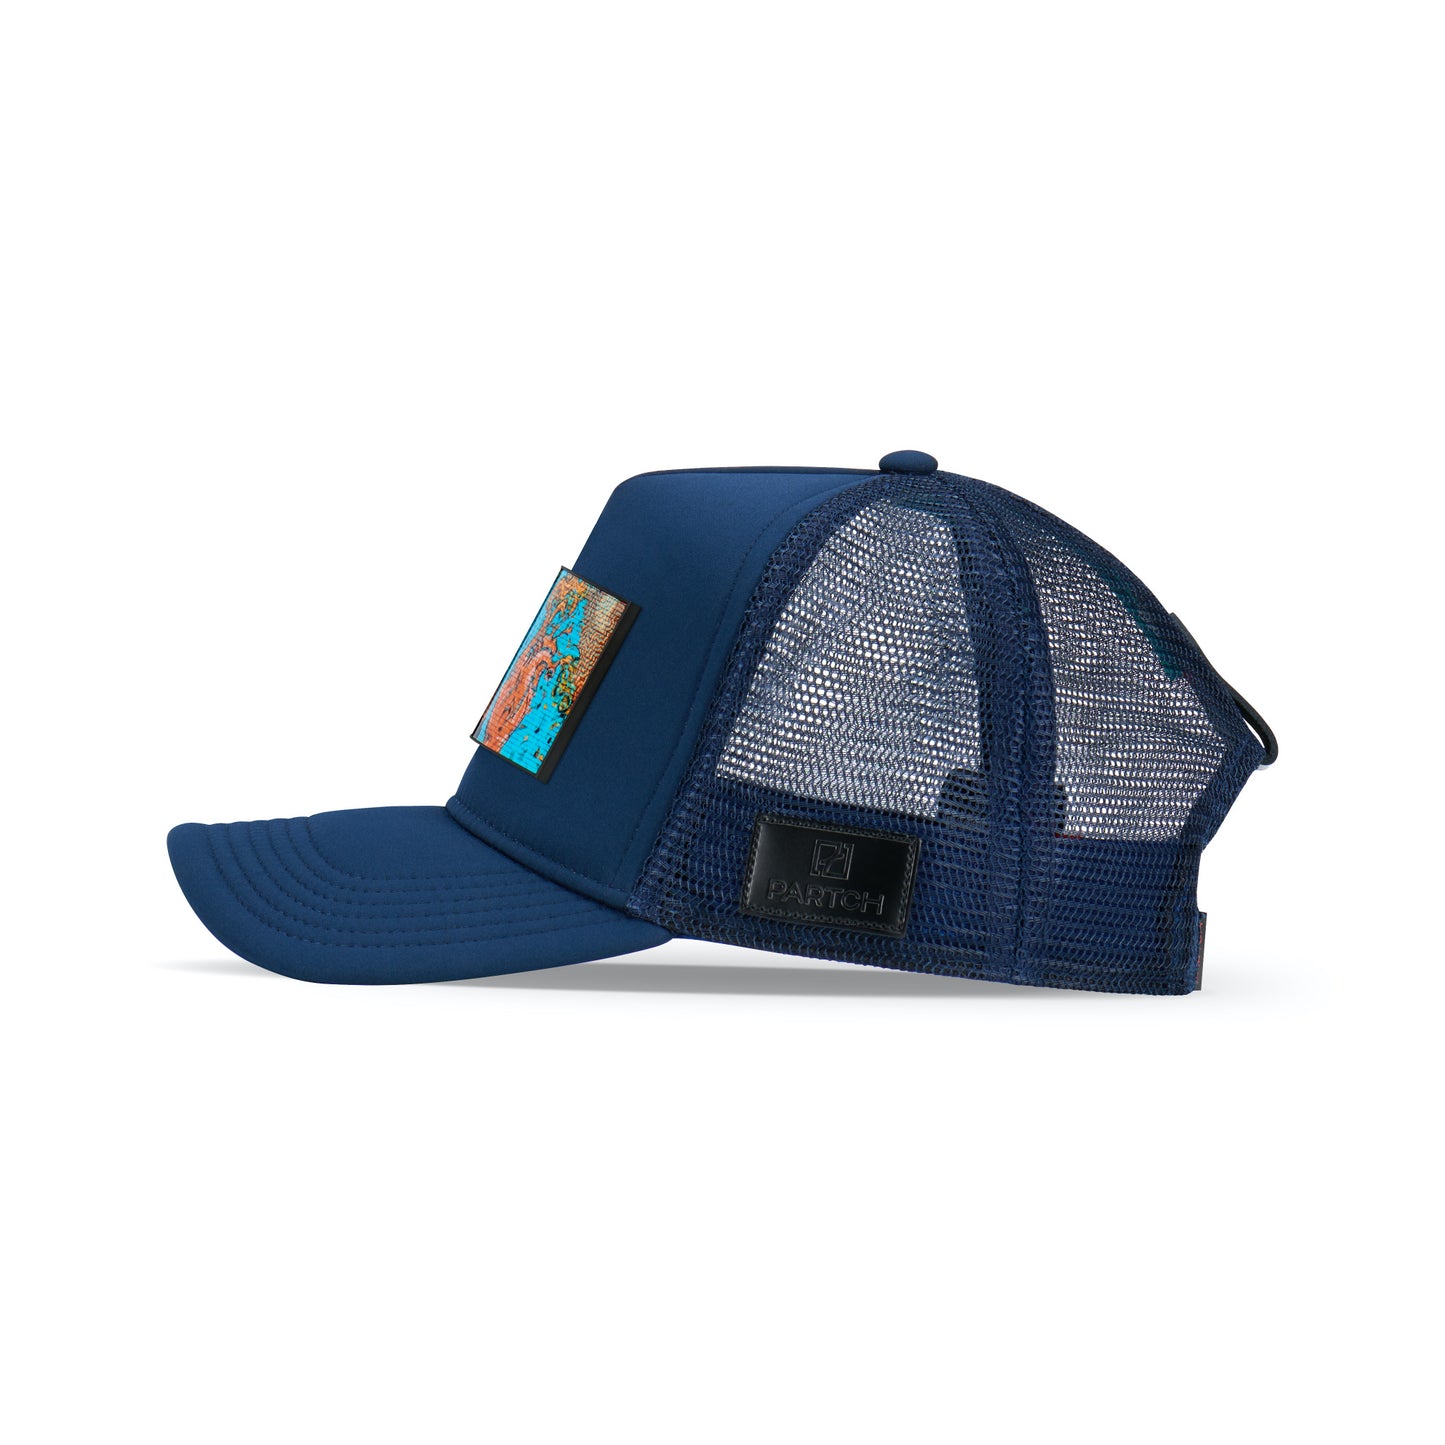 Partch Trucker hats and caps with Art front Panel patch removable | Men’s and Women’s Collection